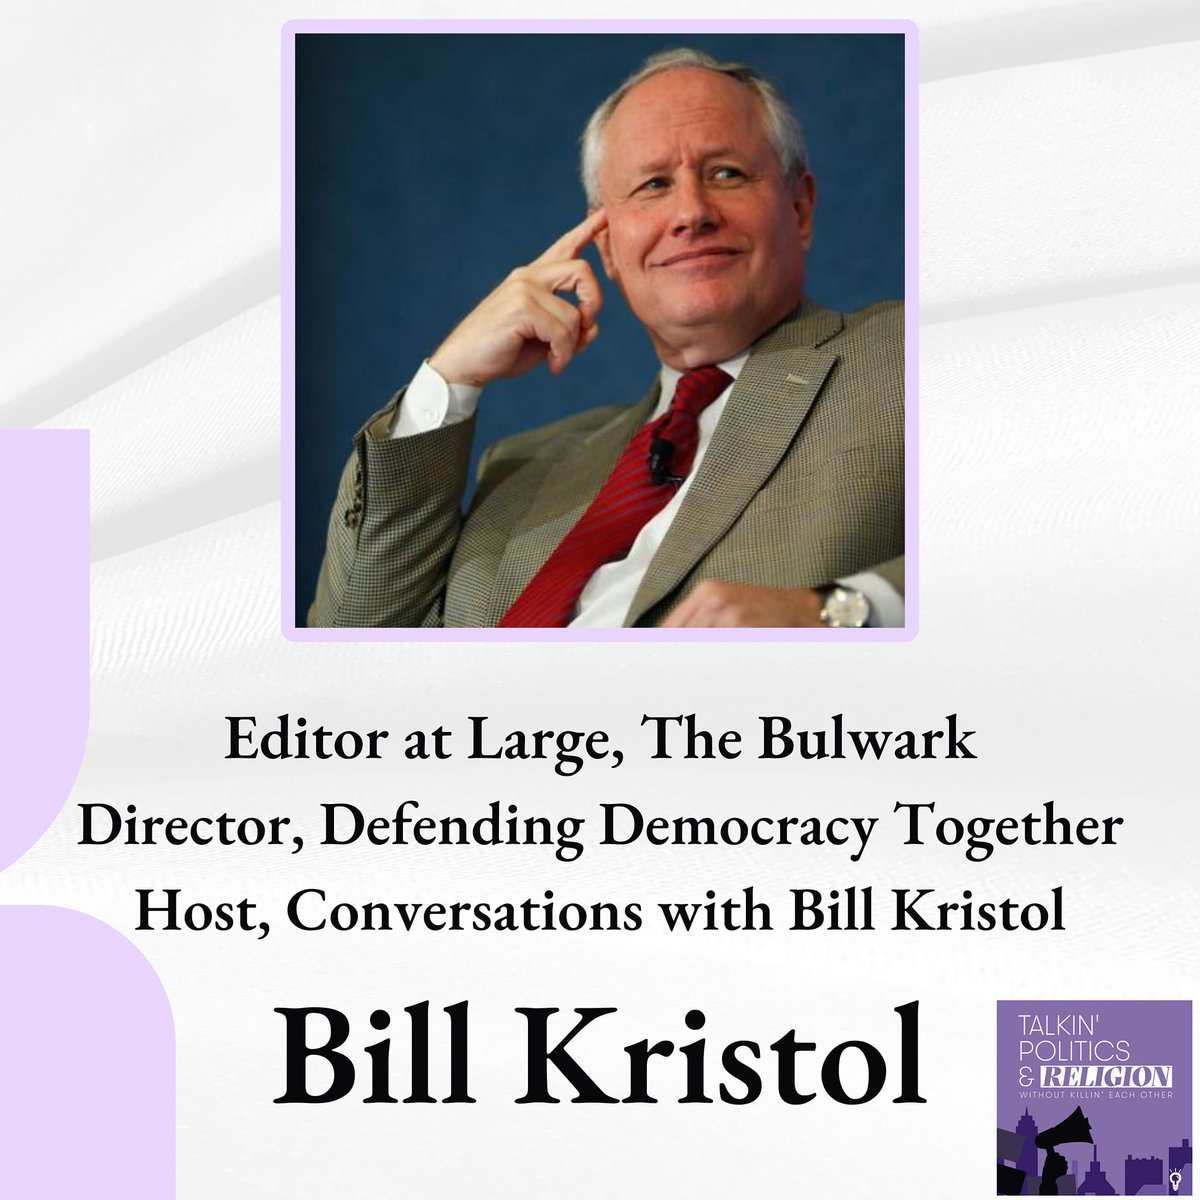 Are @AccountableGOP our greatest @BulwarkOnline agnst authoritarianism and the key constituency in Defending Democracy Together? @BillKristol shares his thoughts on the state of our democracy and how this year's election is shaping up on @TPandRPod. lnkd.in/g7_ZaGv3